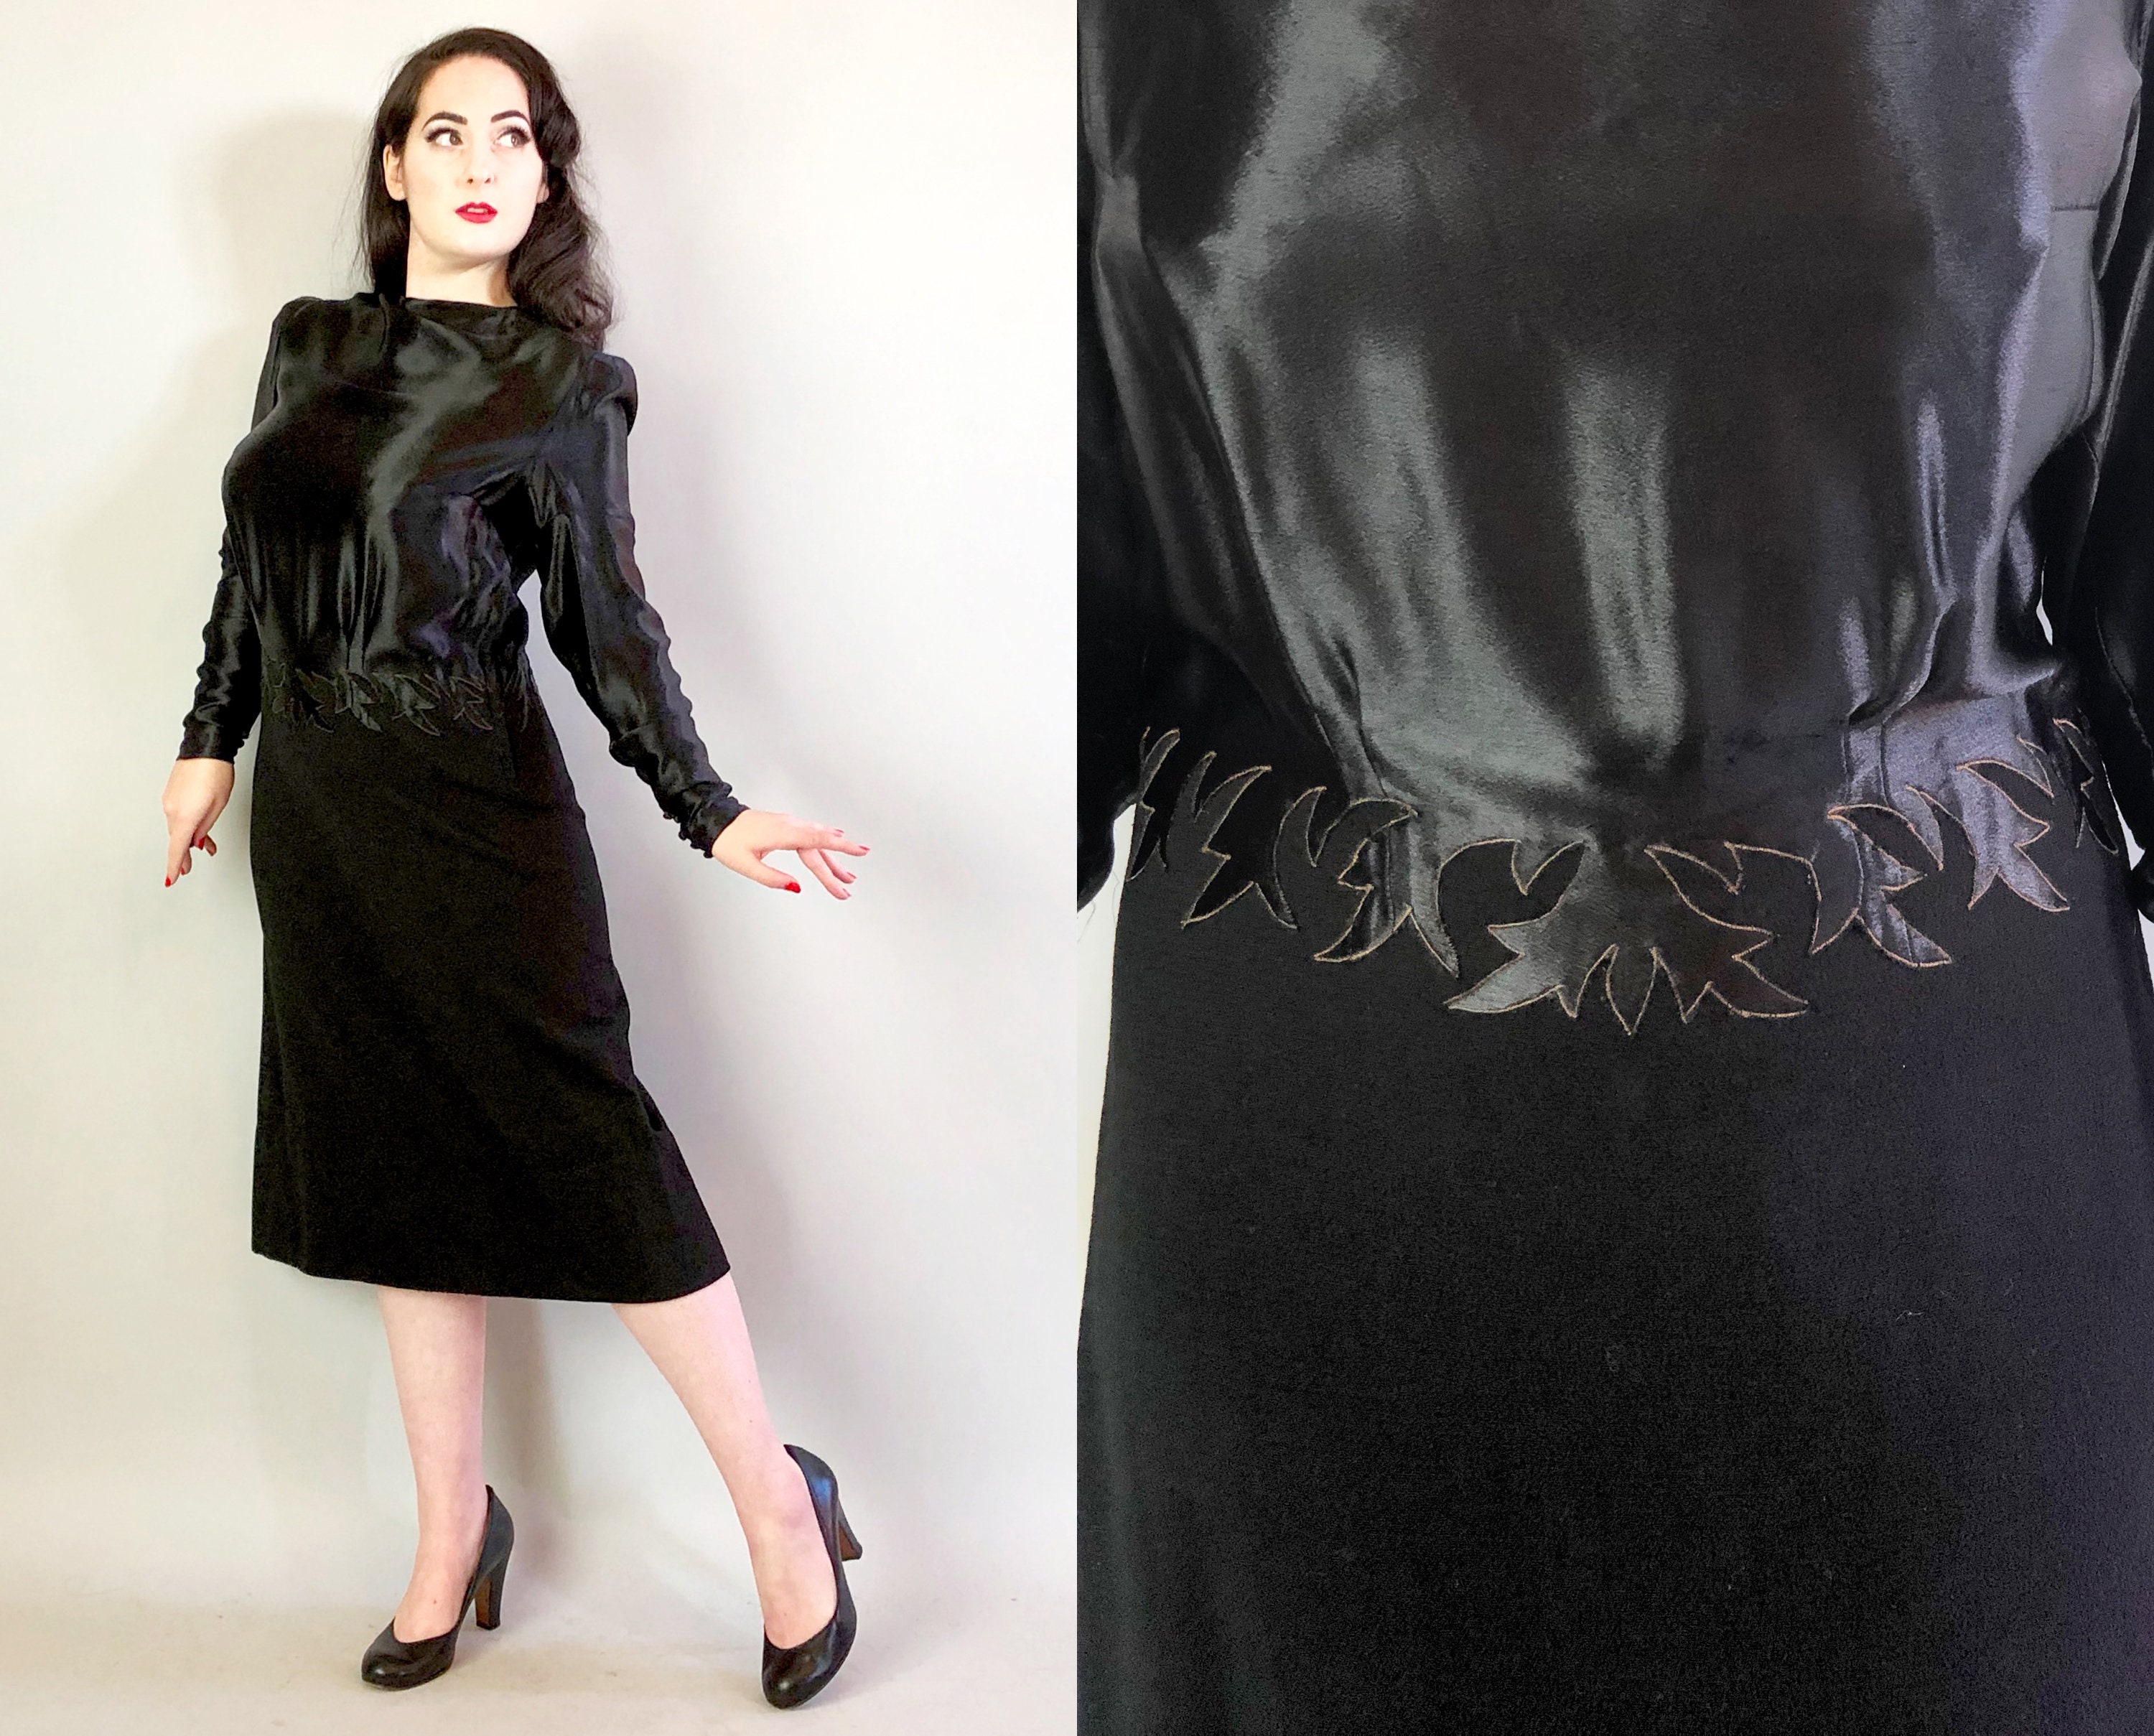 Vintage 40s Inky Black Rayon Crepe Hourglass Femme Fatale Bell -  Canada